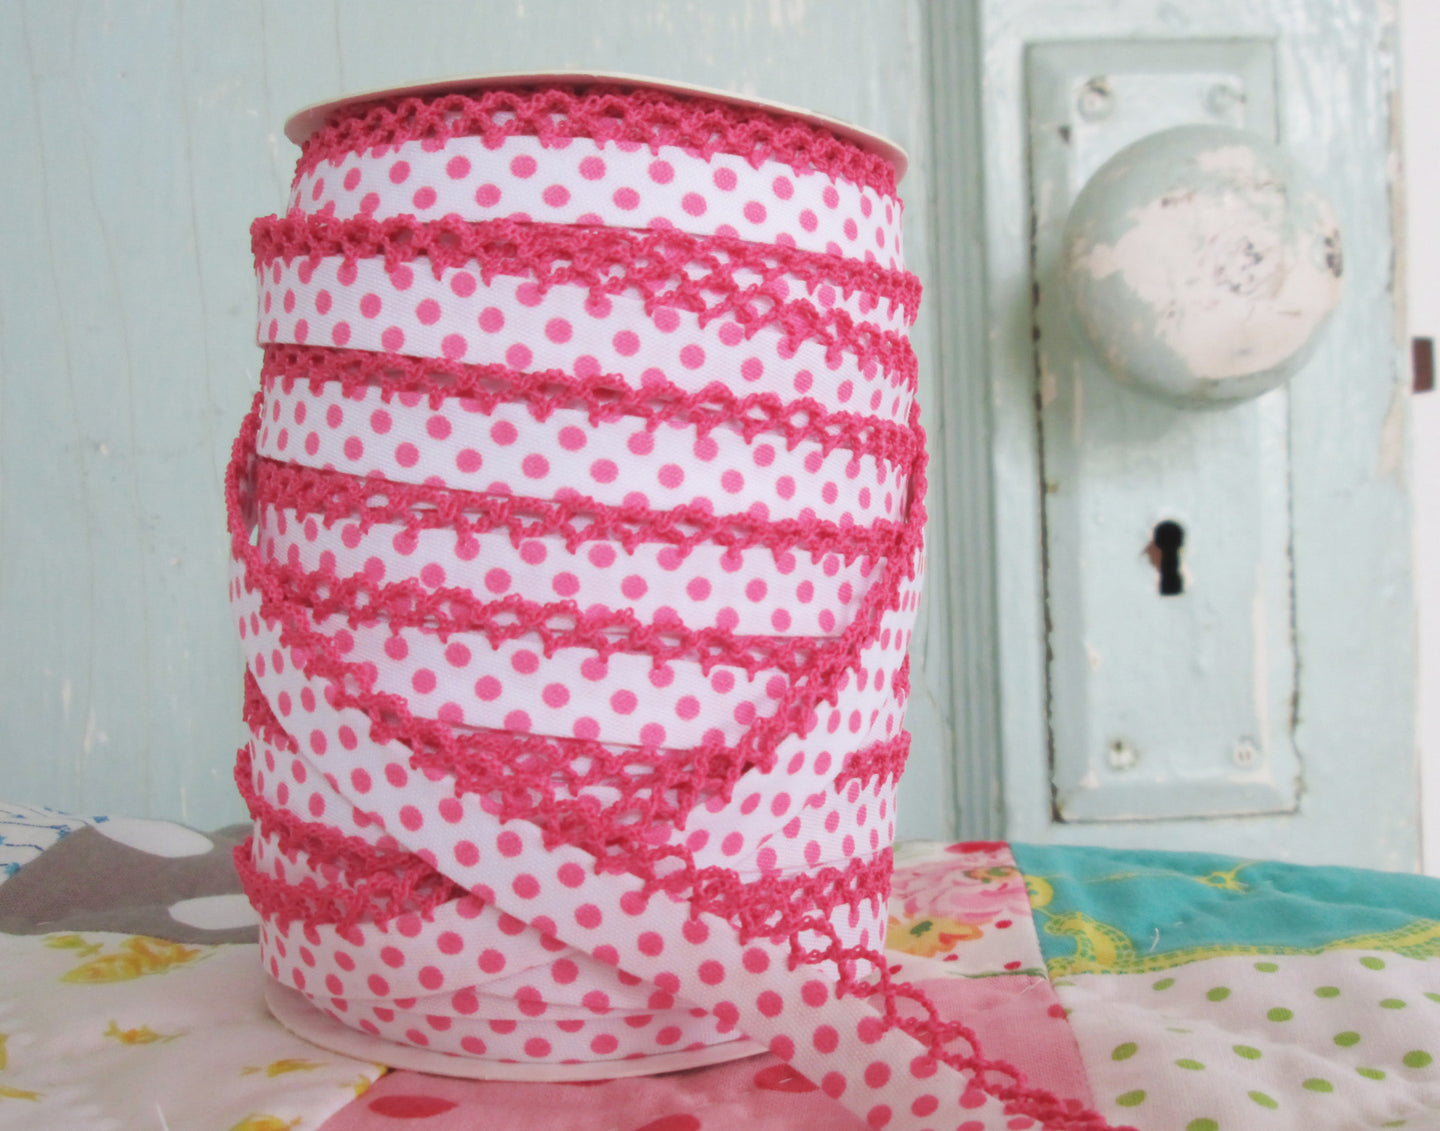 LACE BIAS TAPE, FUCHSIA  DOTS ON WHITE Double Fold Crochet Edge (BY THE YARD)